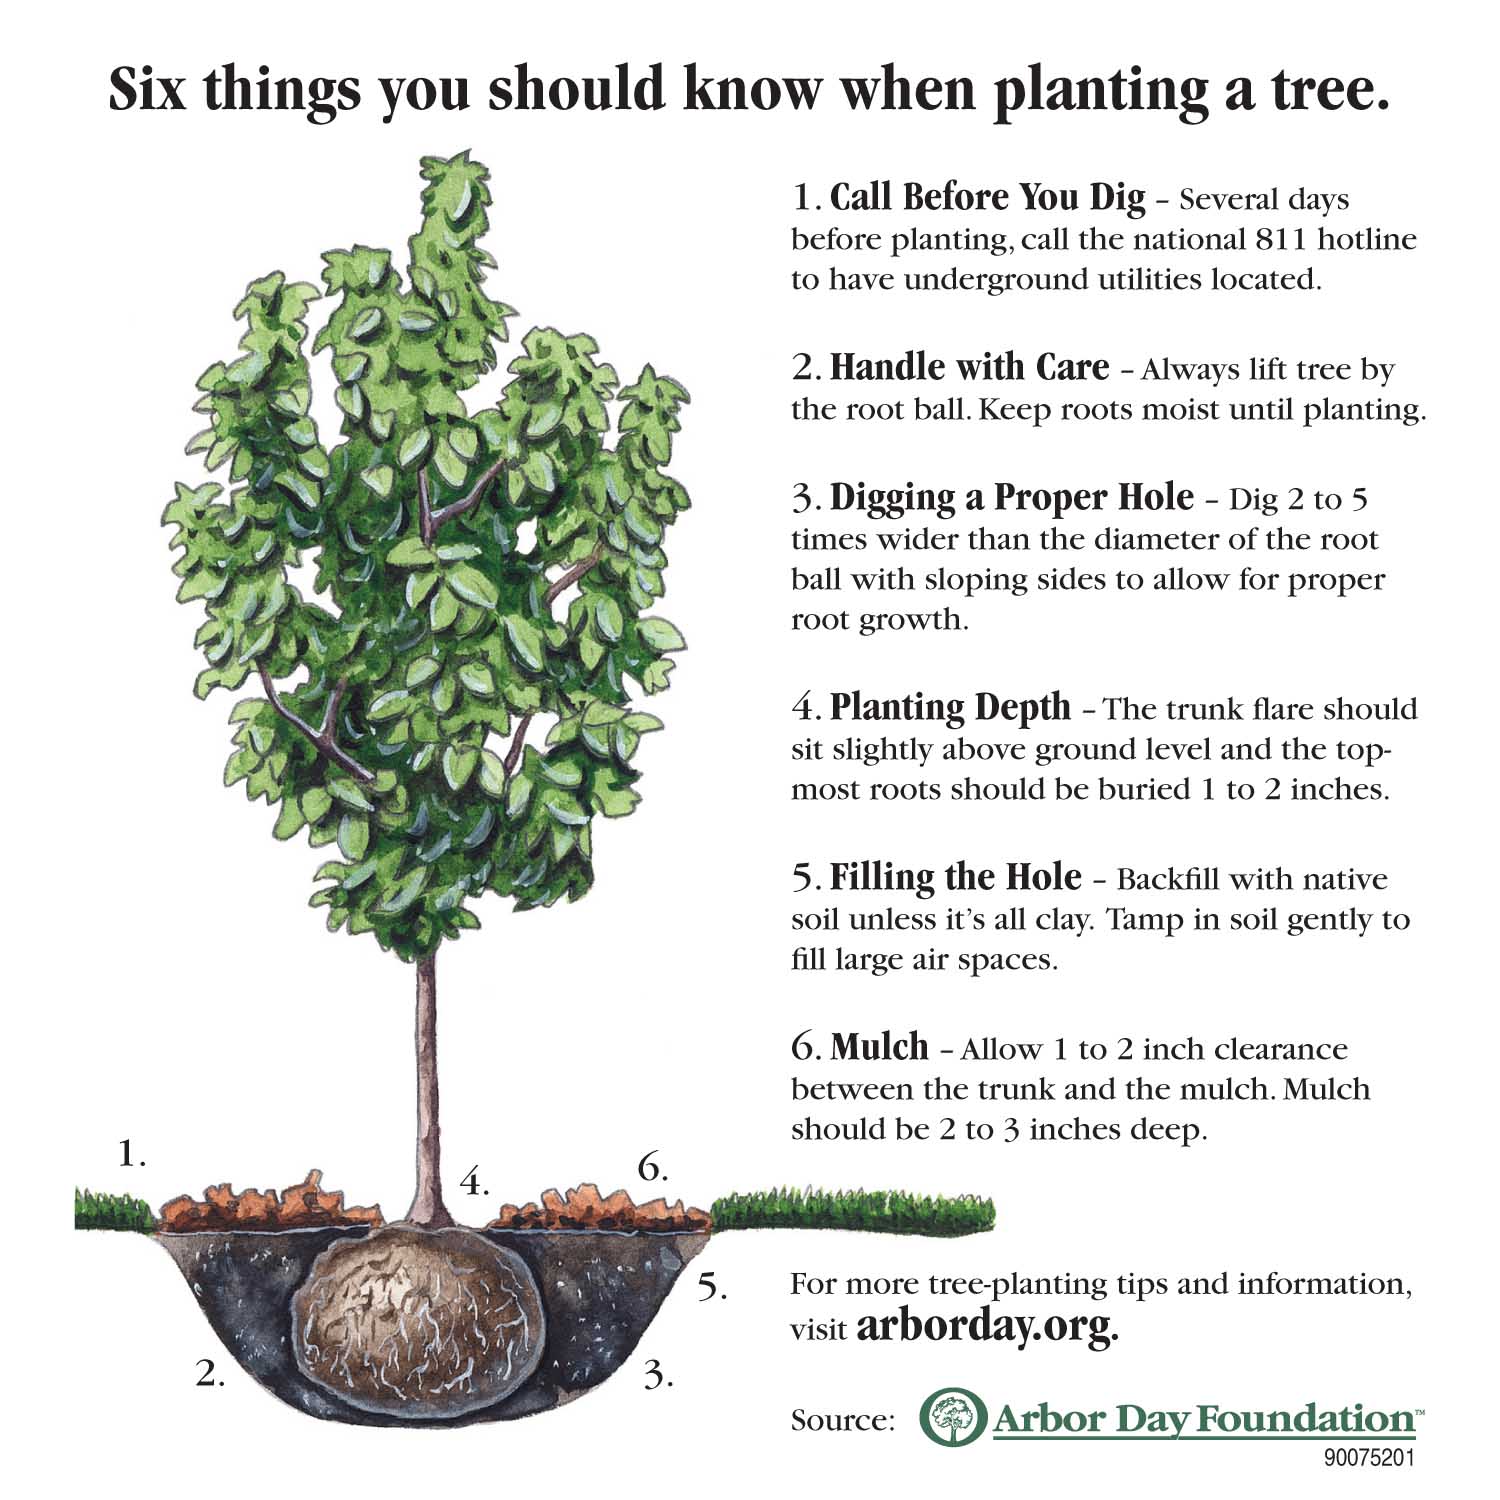 The Arbor Day Foundation has all the information you need for successful tree planting on its website, www.arborday.org.